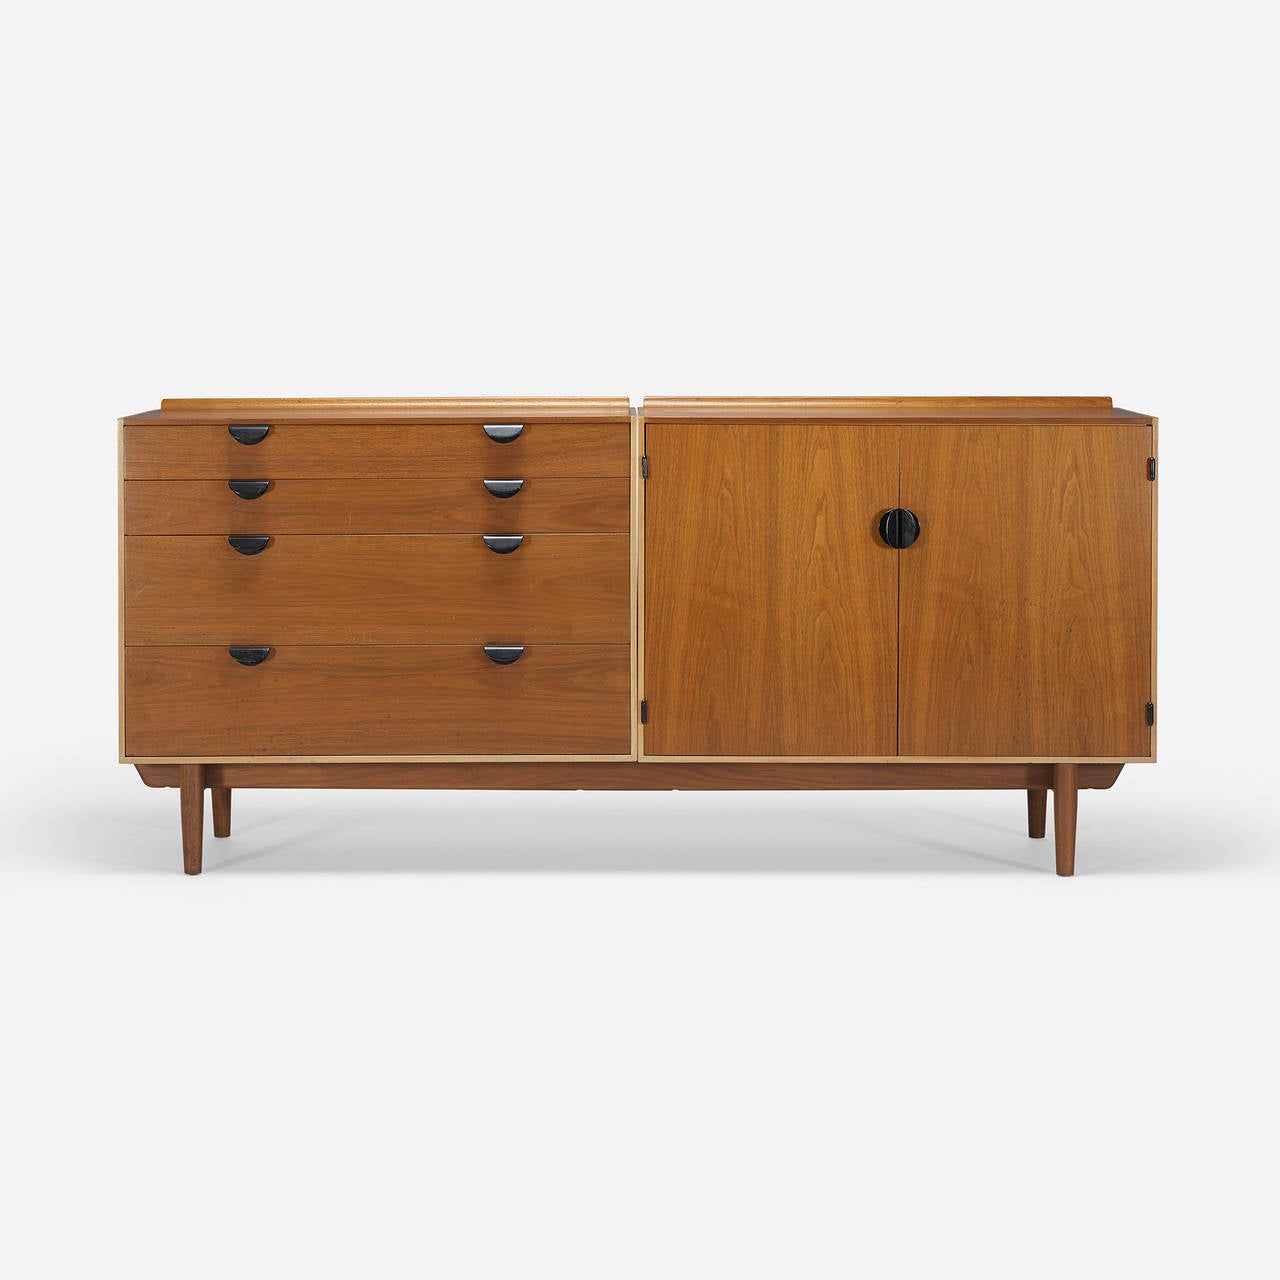 Cabinet features four drawers and two doors concealing two drawers and two adjustable shelves. Signed with applied metal manufacturer's label to interior: [Baker Furniture].